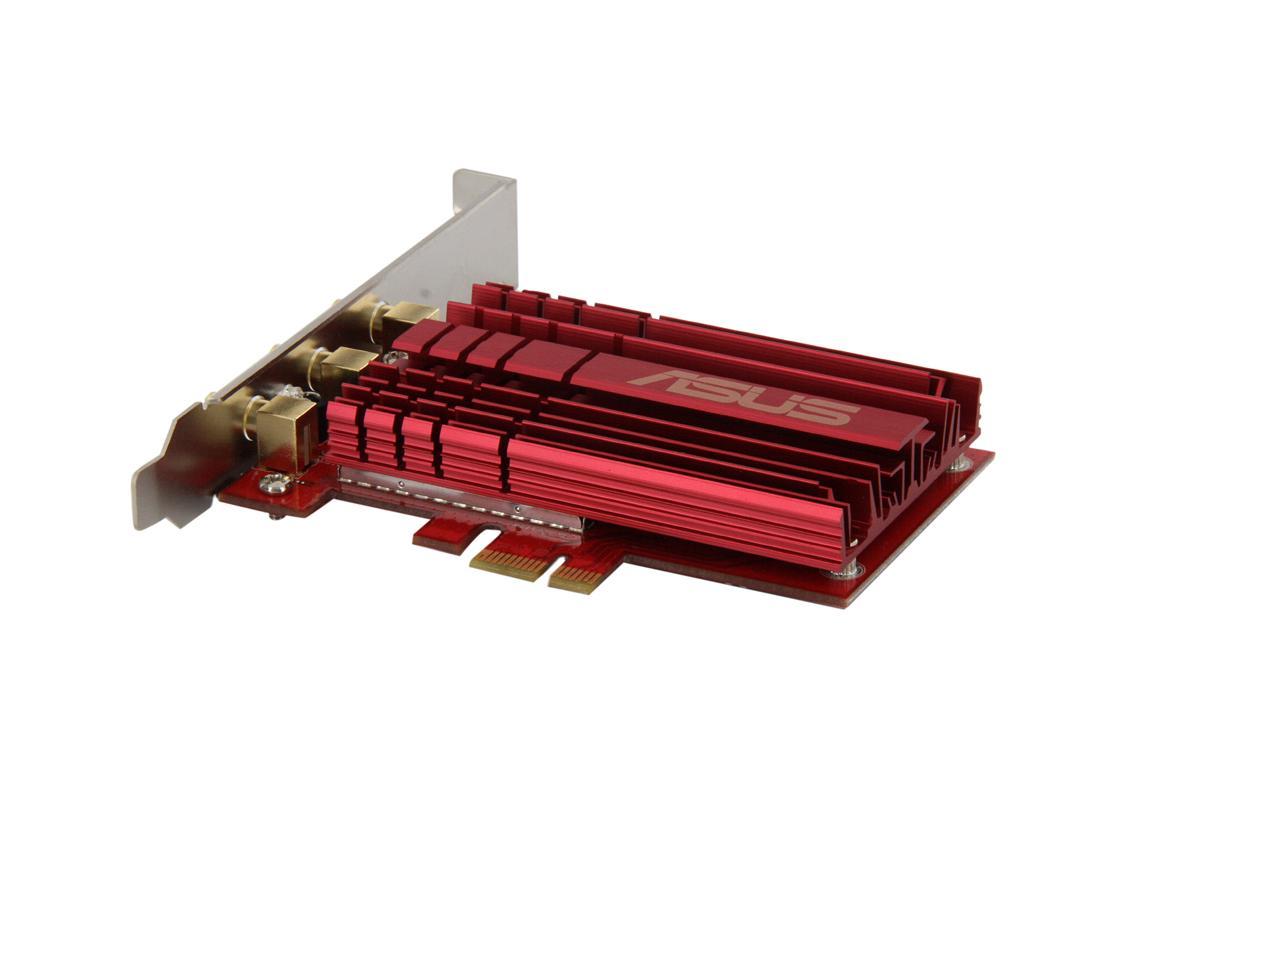 asus pce ac68 dual band pcie adapter